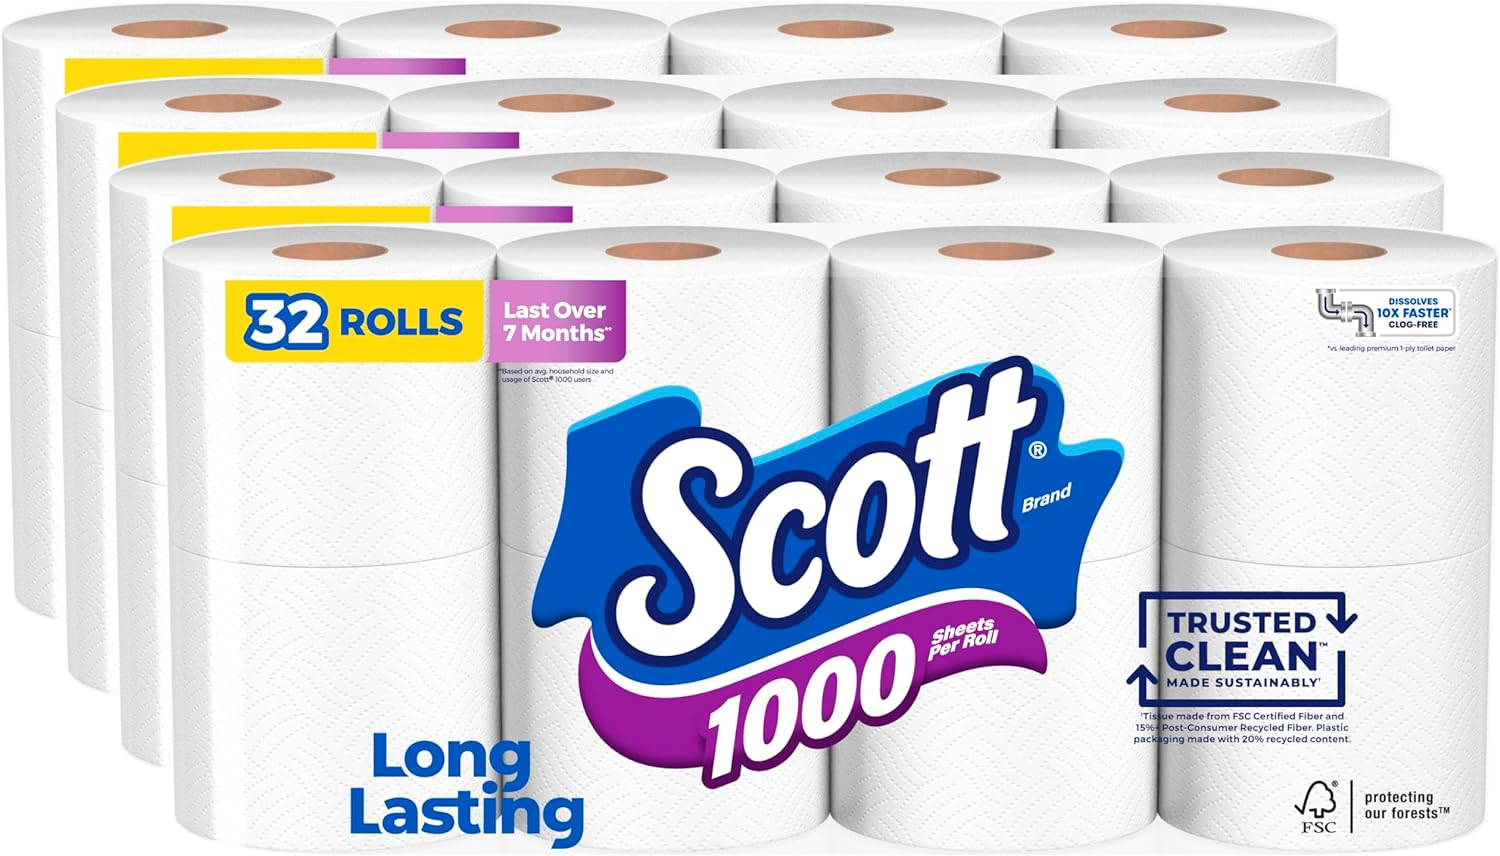 Scott 1000 Trusted Clean Toilet Paper, 32 Rolls, Septic-Safe, 1-Ply Toilet Tissue $22.91